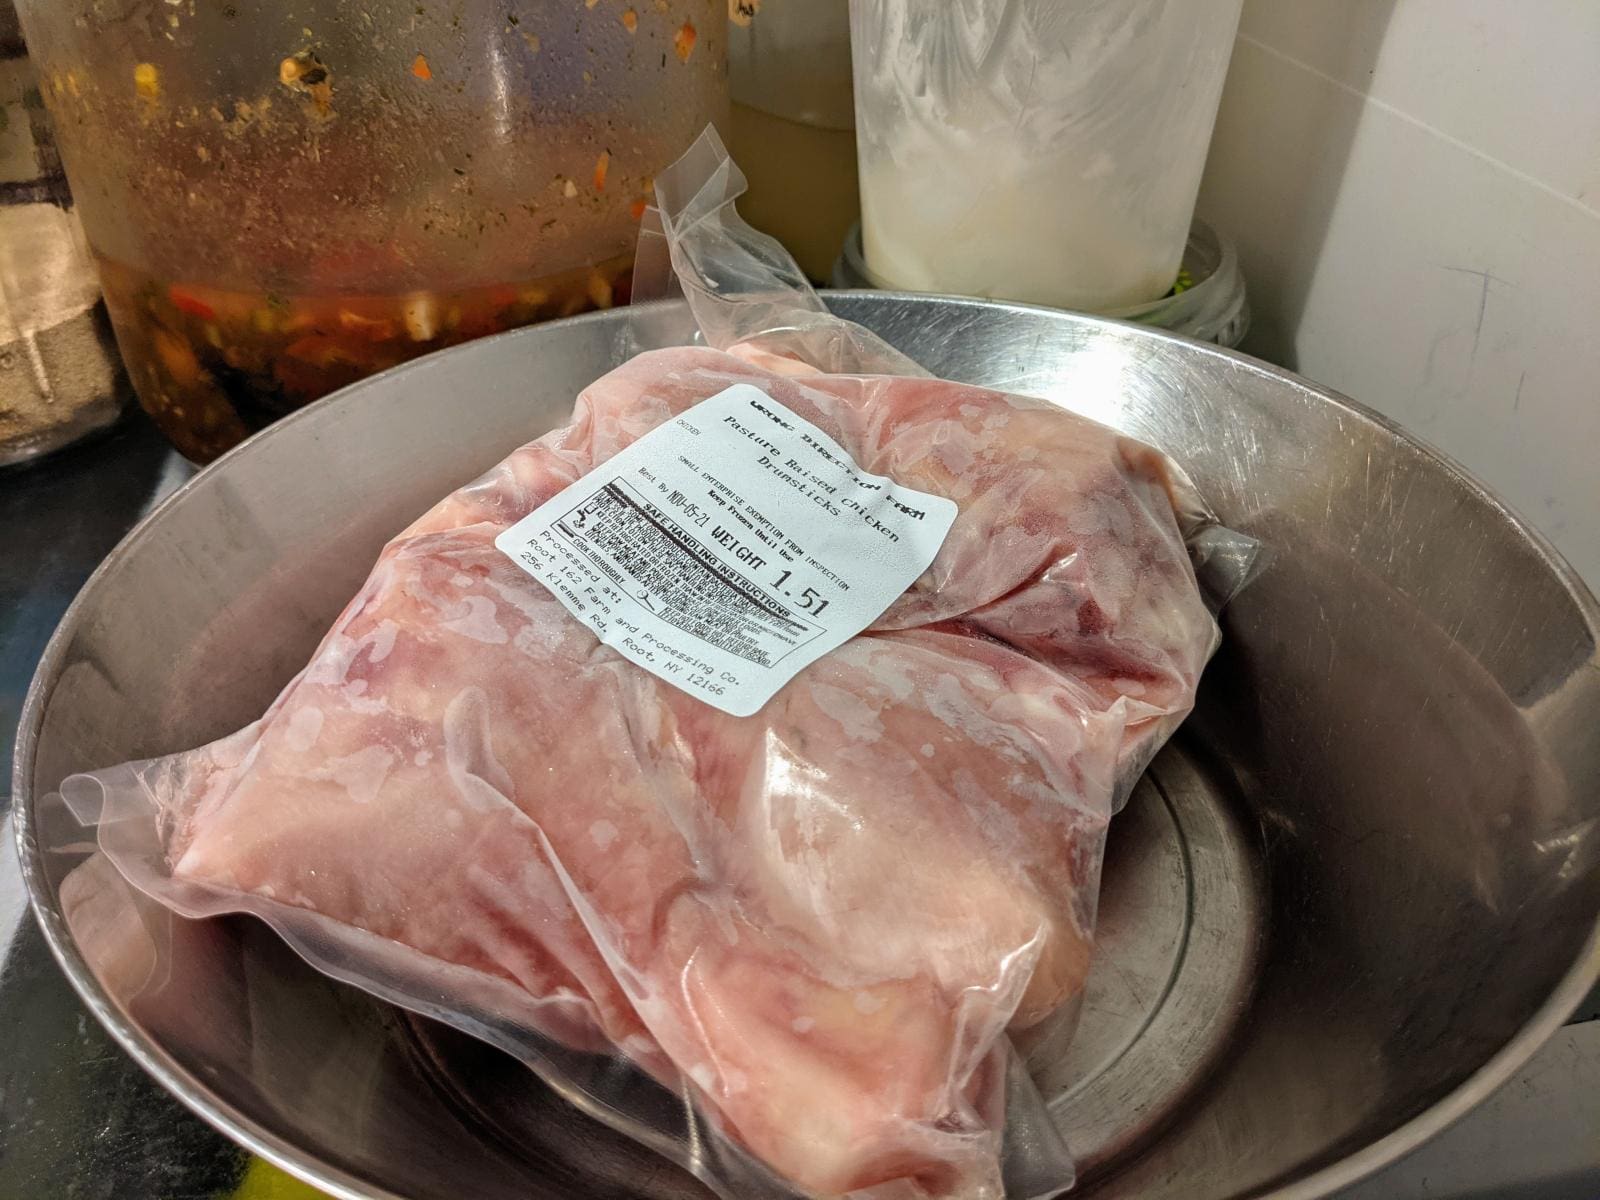 Pasture raised chicken defrosting in the refrigerator. The package is placed on a bowl to catch any drips.